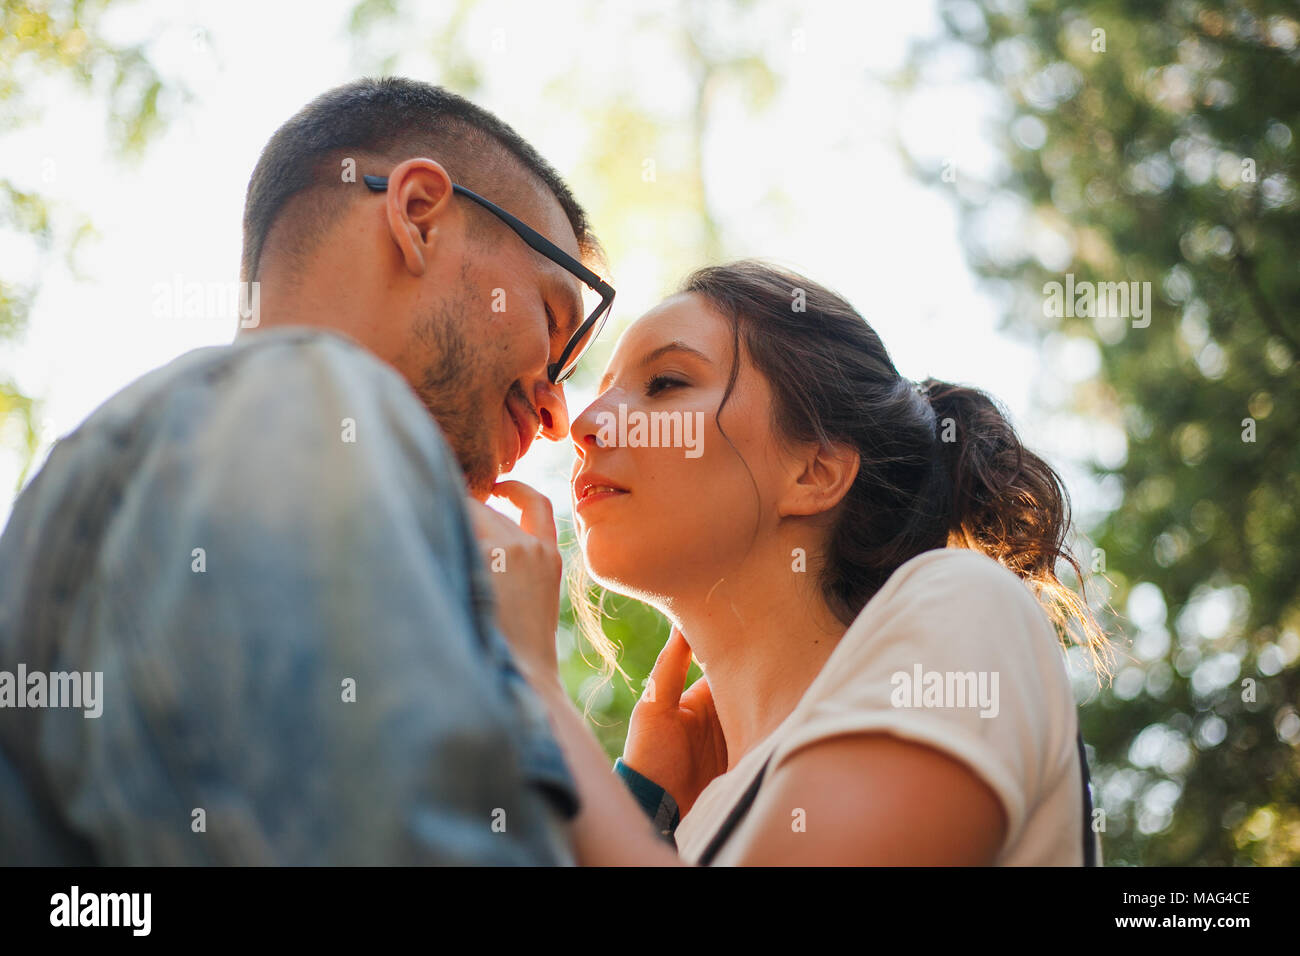 Beautiful young couple kiss and hug in a summer park near trees Stock Photo